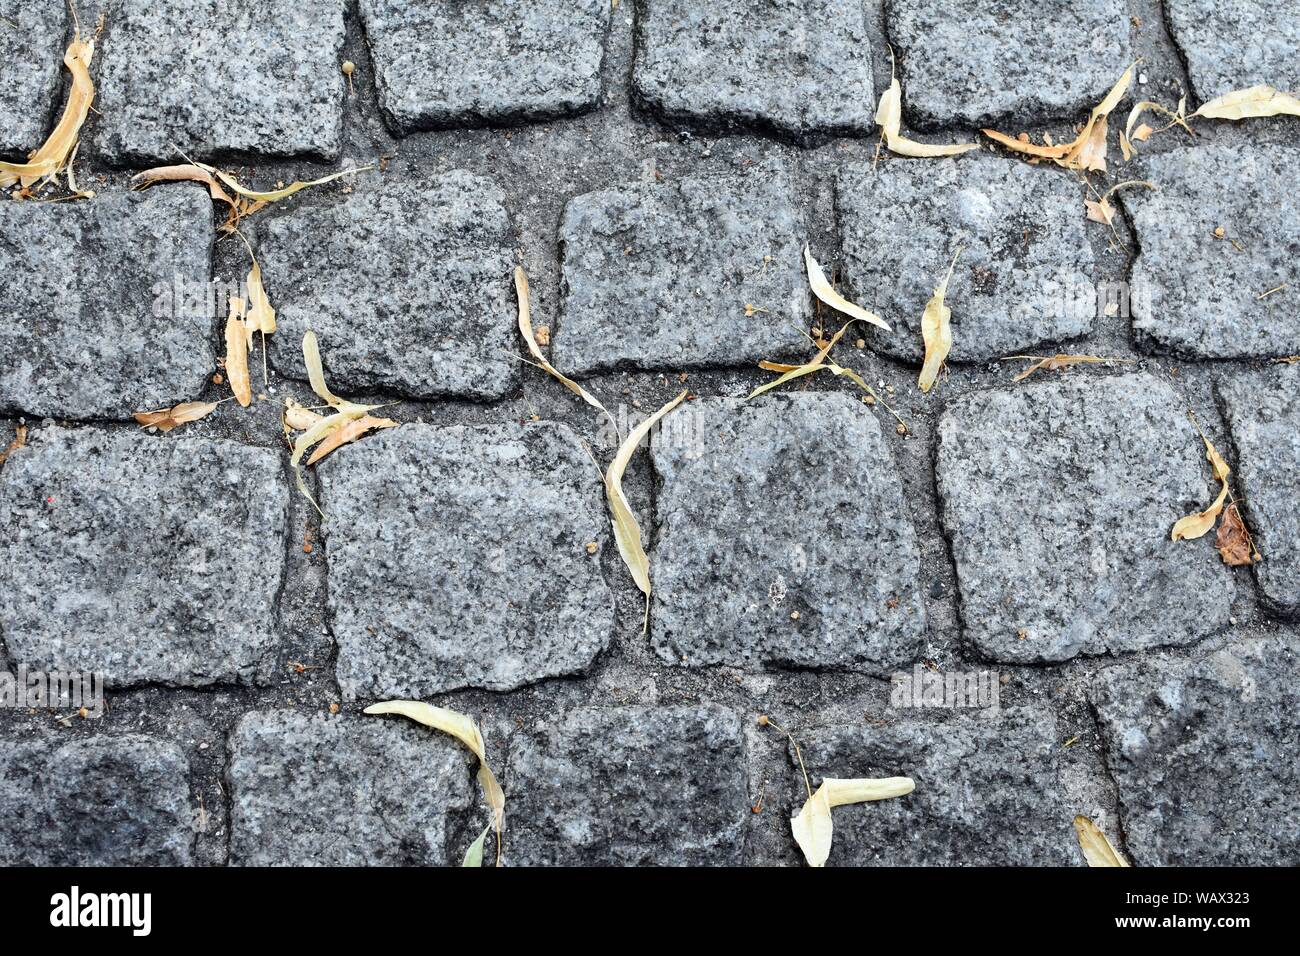 Abstract background with gray pavement stone and dry leaves. Stock Photo